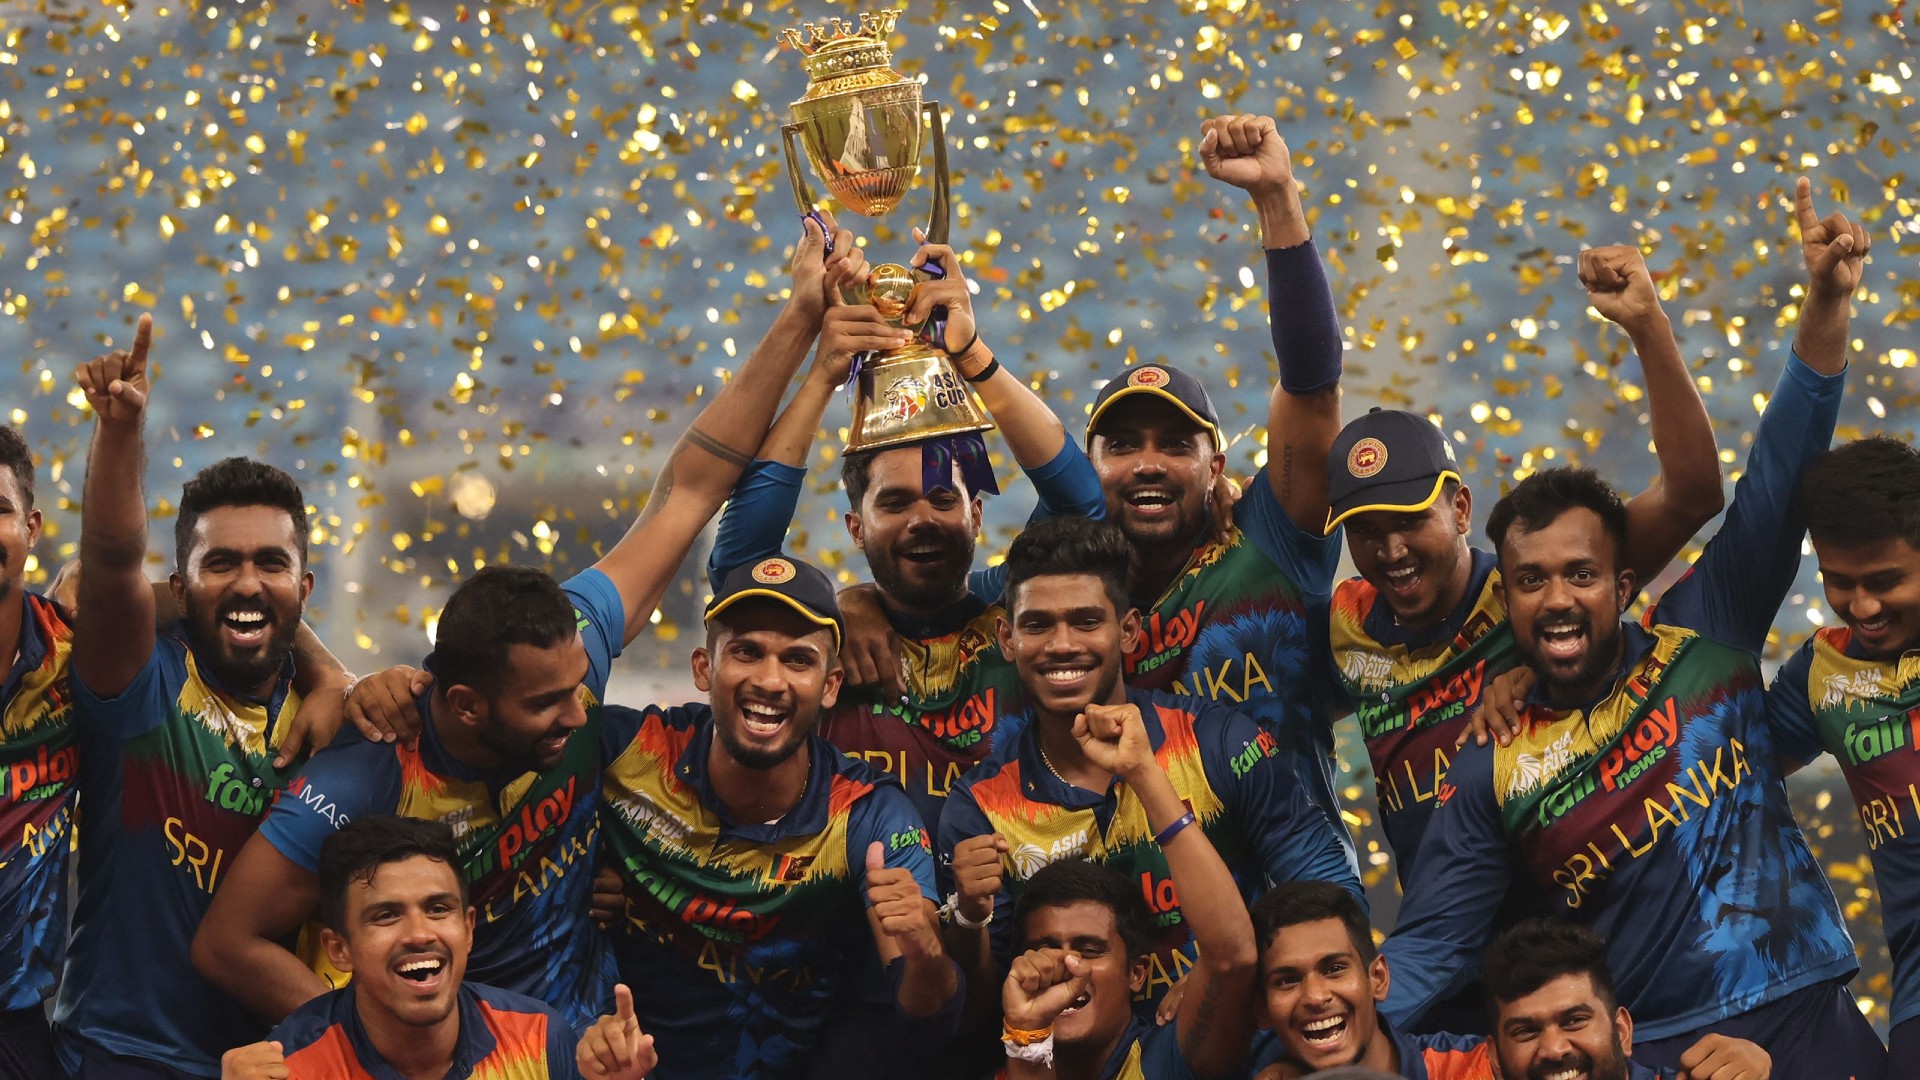 ICC World T20 2022 | Sri Lanka can quietly trip up one of the more-fancied opponents, warns Russell Arnold